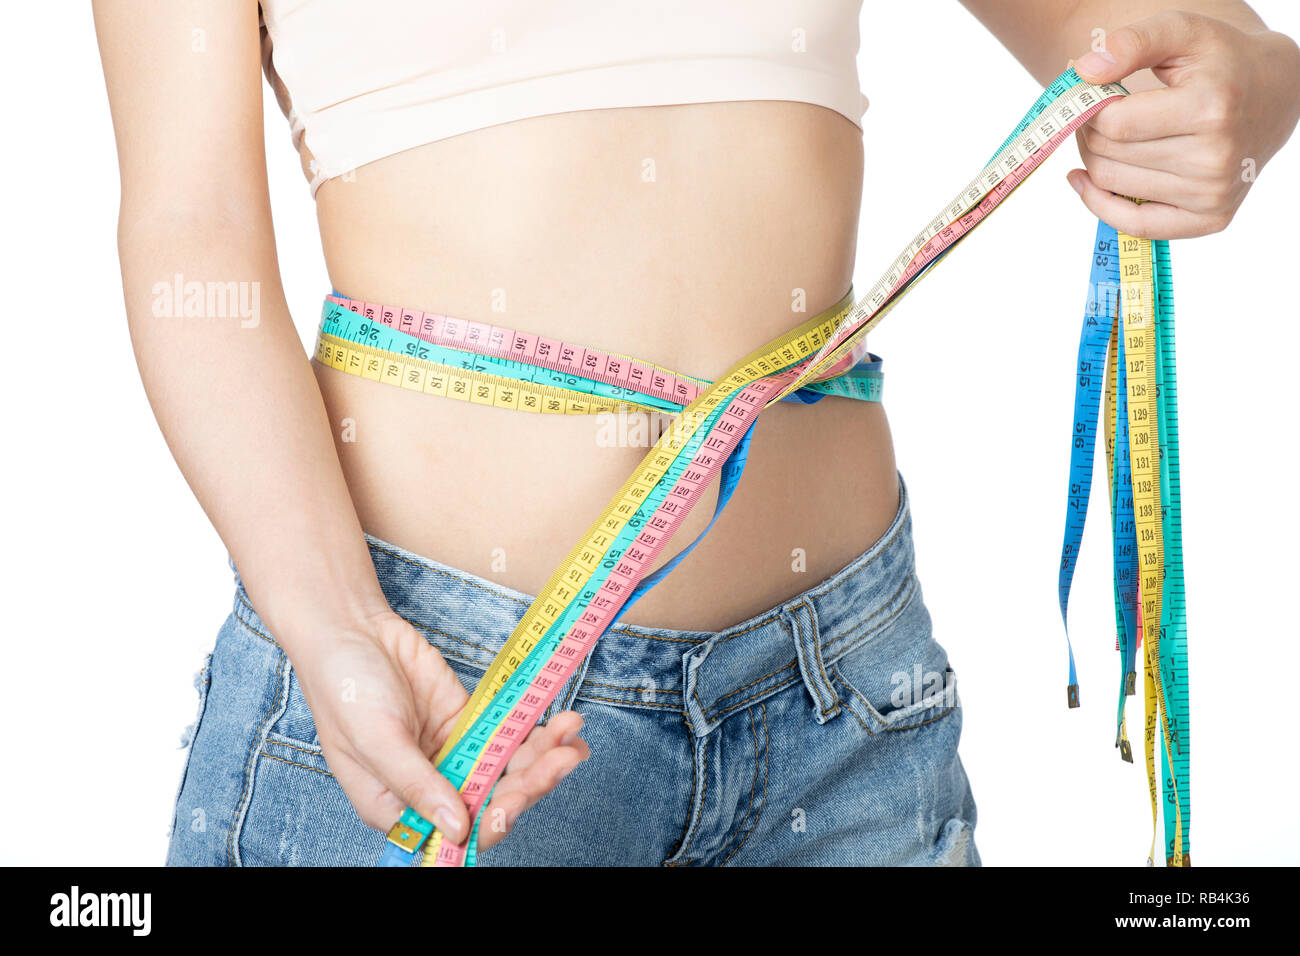 Closeup of a woman's waistline with a tape measure around her flat stomach  Royalty-Free Stock Image - Storyblocks